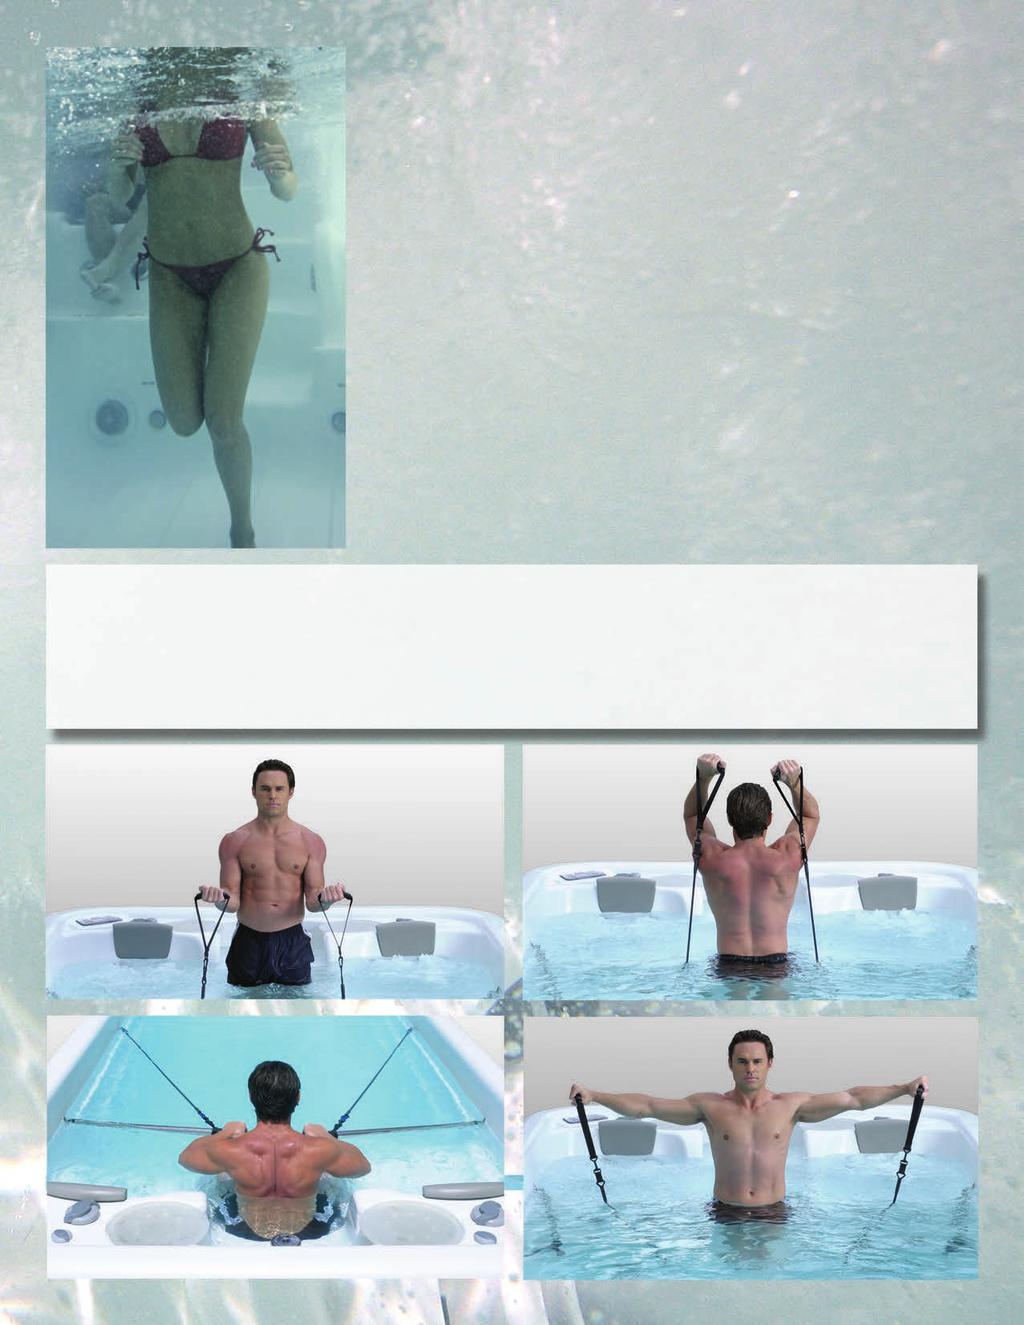 Aerobic Training A wide variety of aerobic exercises are possible in a PowerPool.